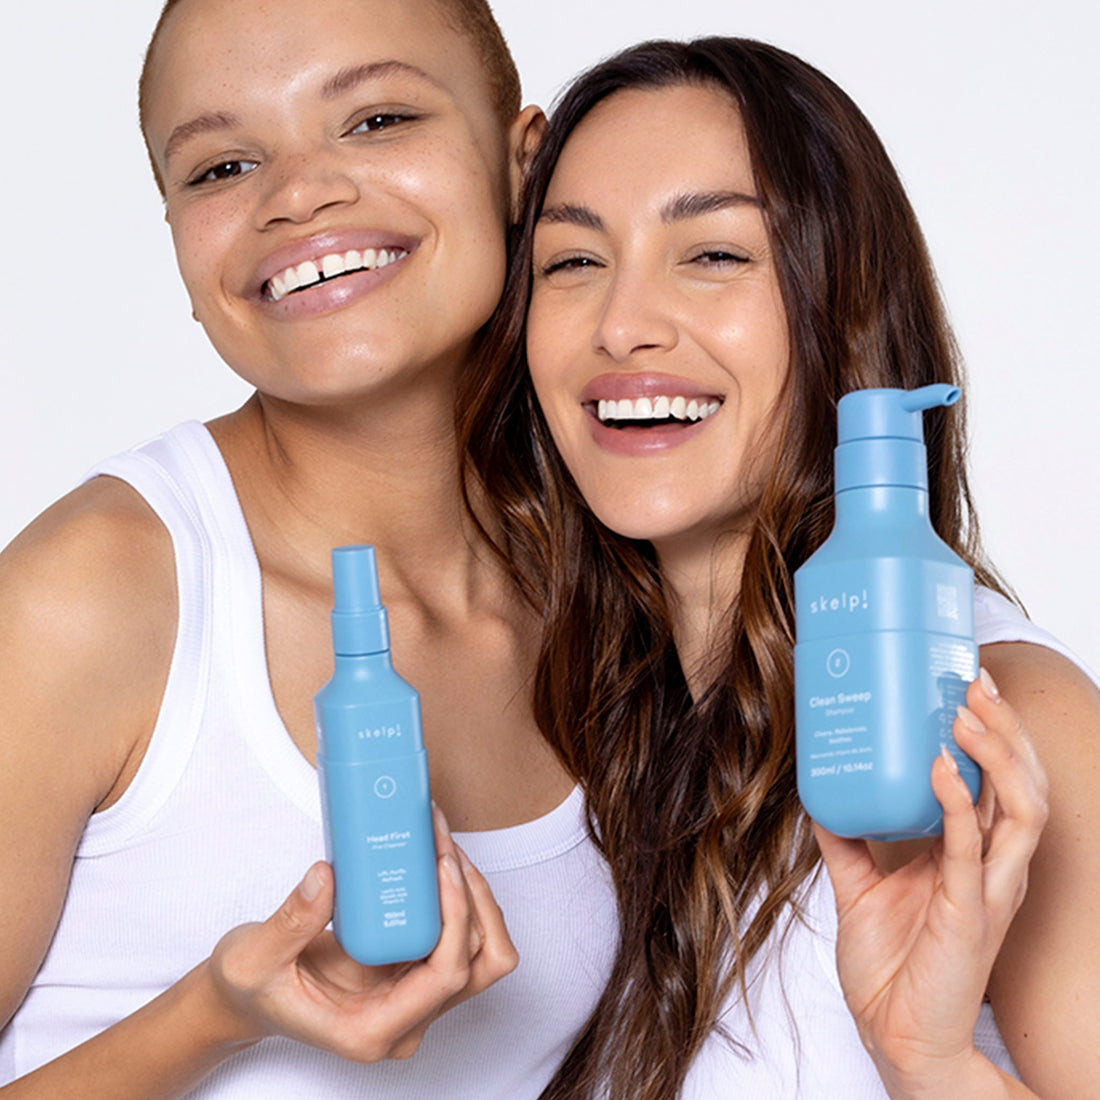 Two models holding skelp! pre-cleanser and shampoo